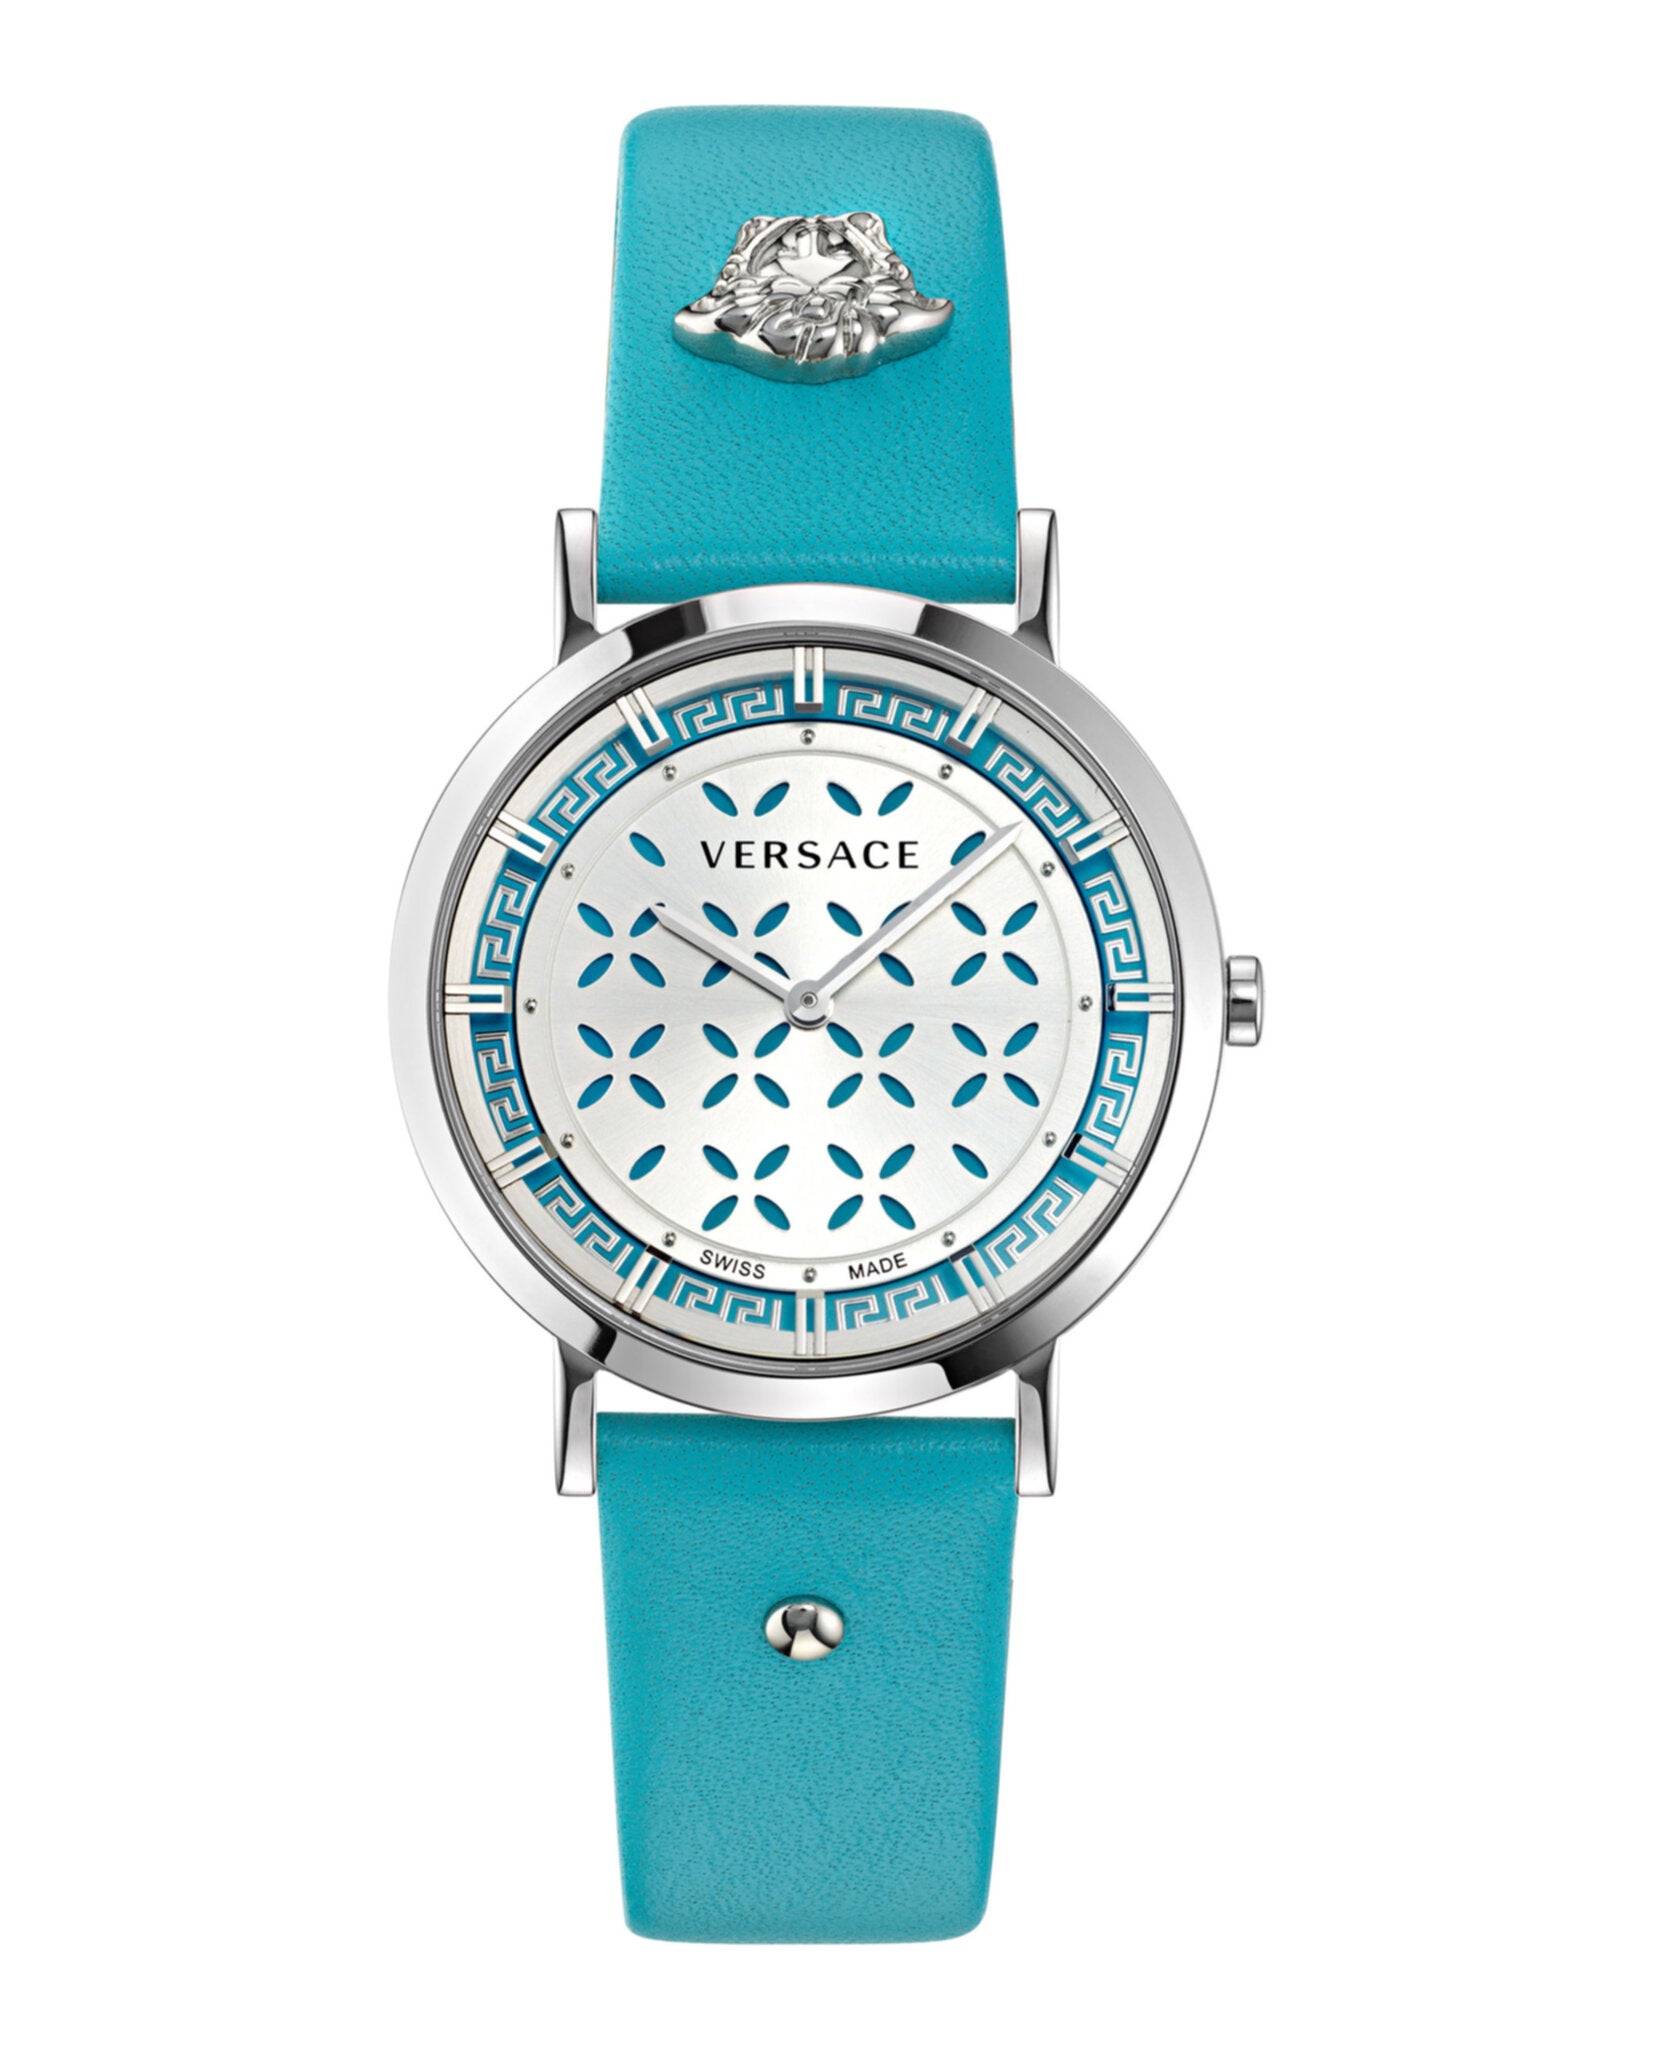 Versace New Generation Leather Watch